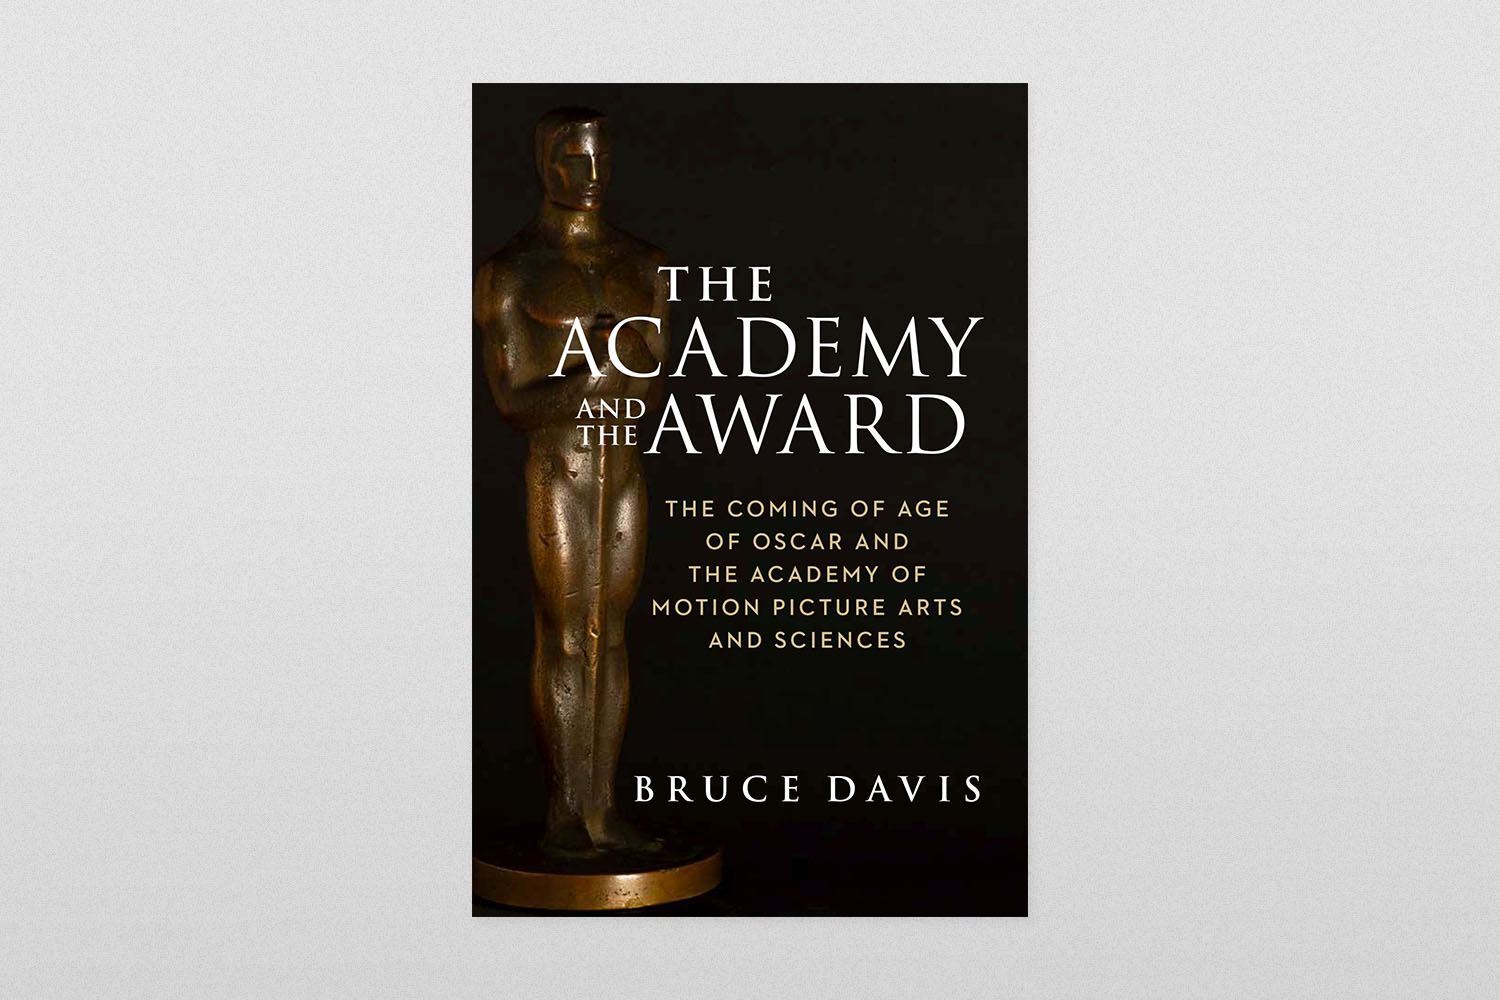 The Academy and the Award- The Coming of Age of Oscar and the Academy of Motion Picture Arts and Sciences